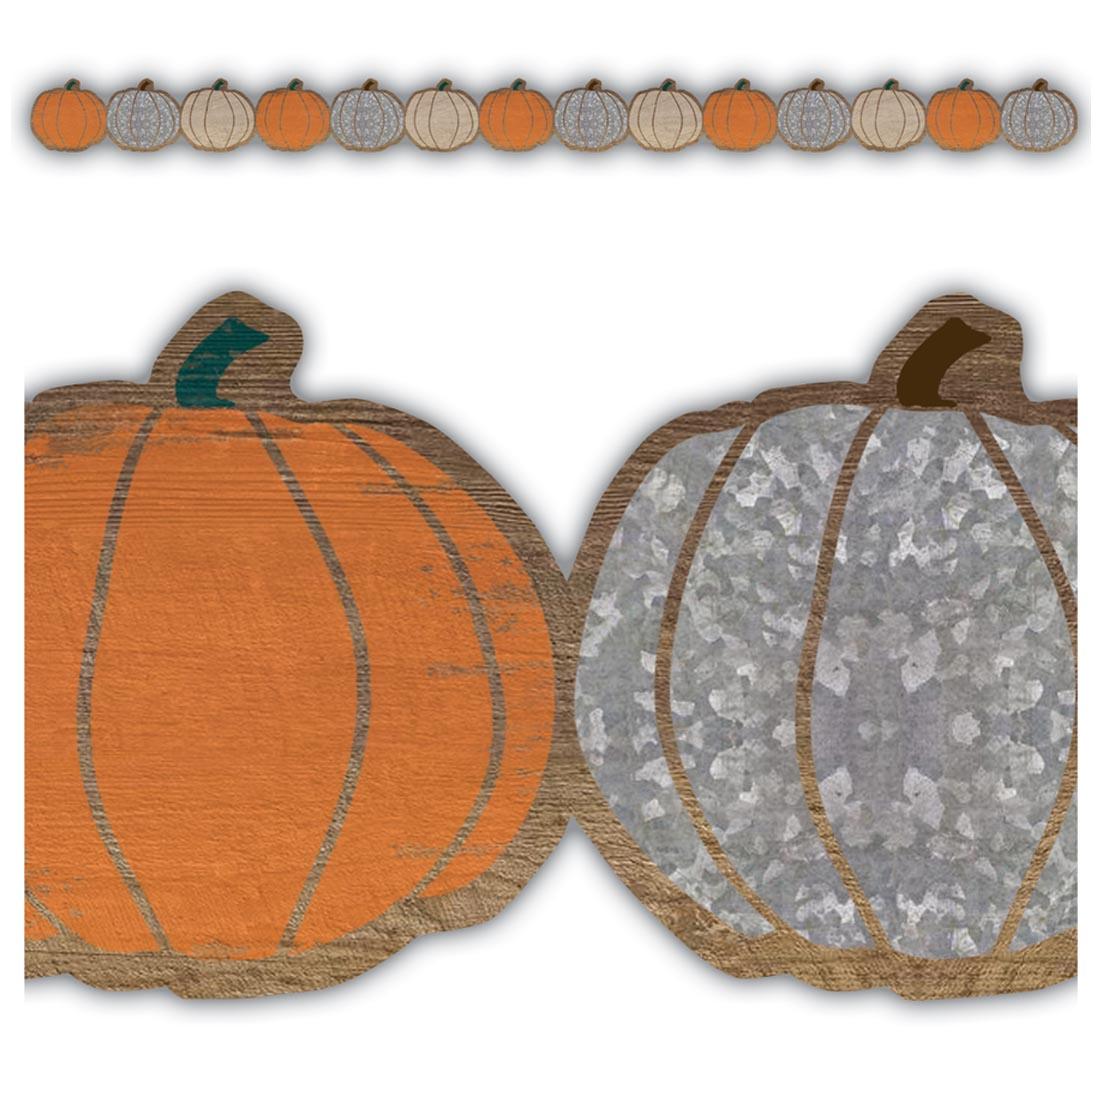 Full view and closeup of the Pumpkins Die Cut Border Trim from the Home Sweet Classroom collection by Teacher Created Resources